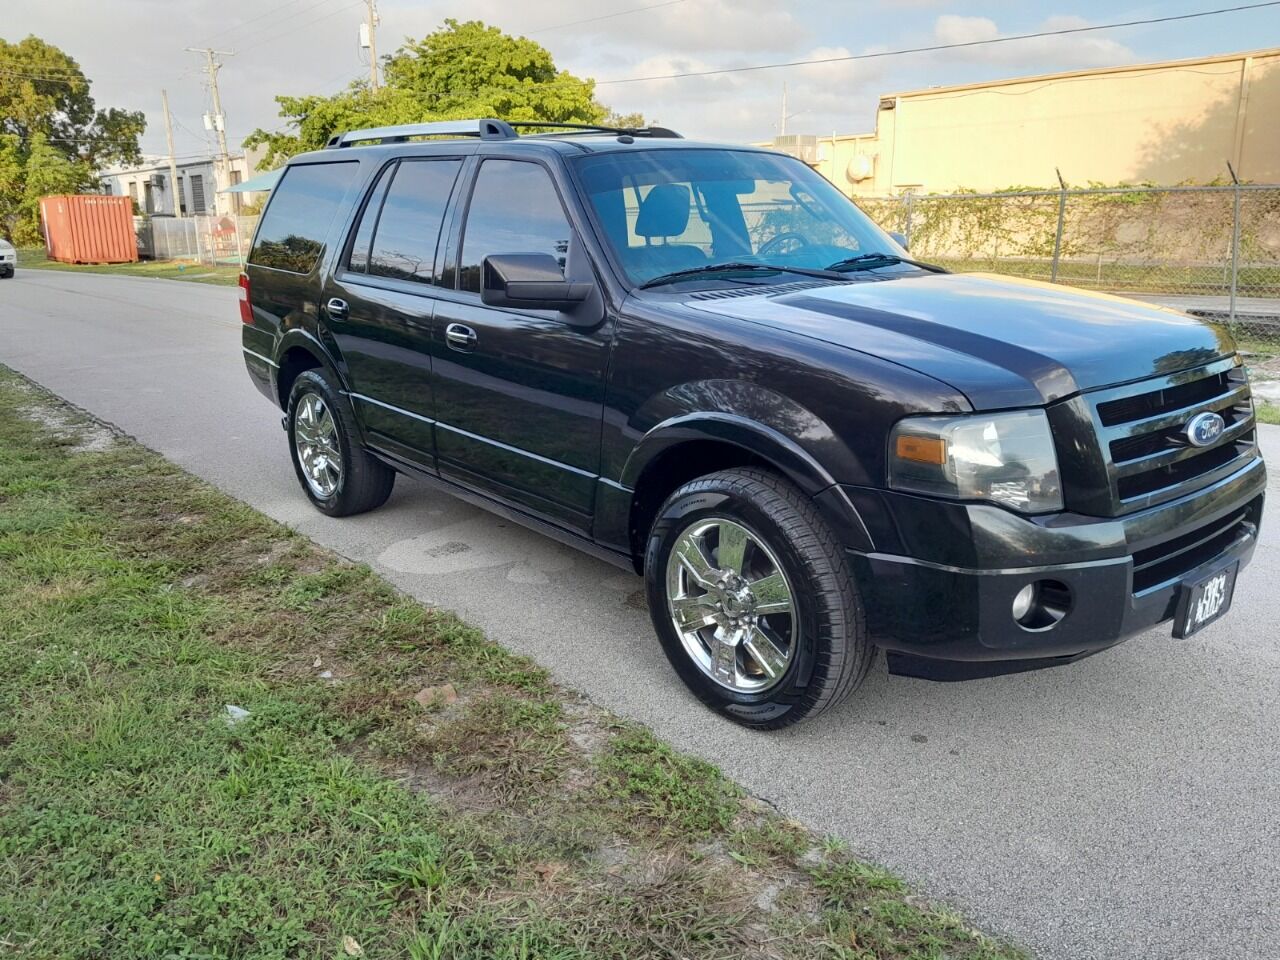 2010 Ford Expedition SUV / Crossover - $5,950